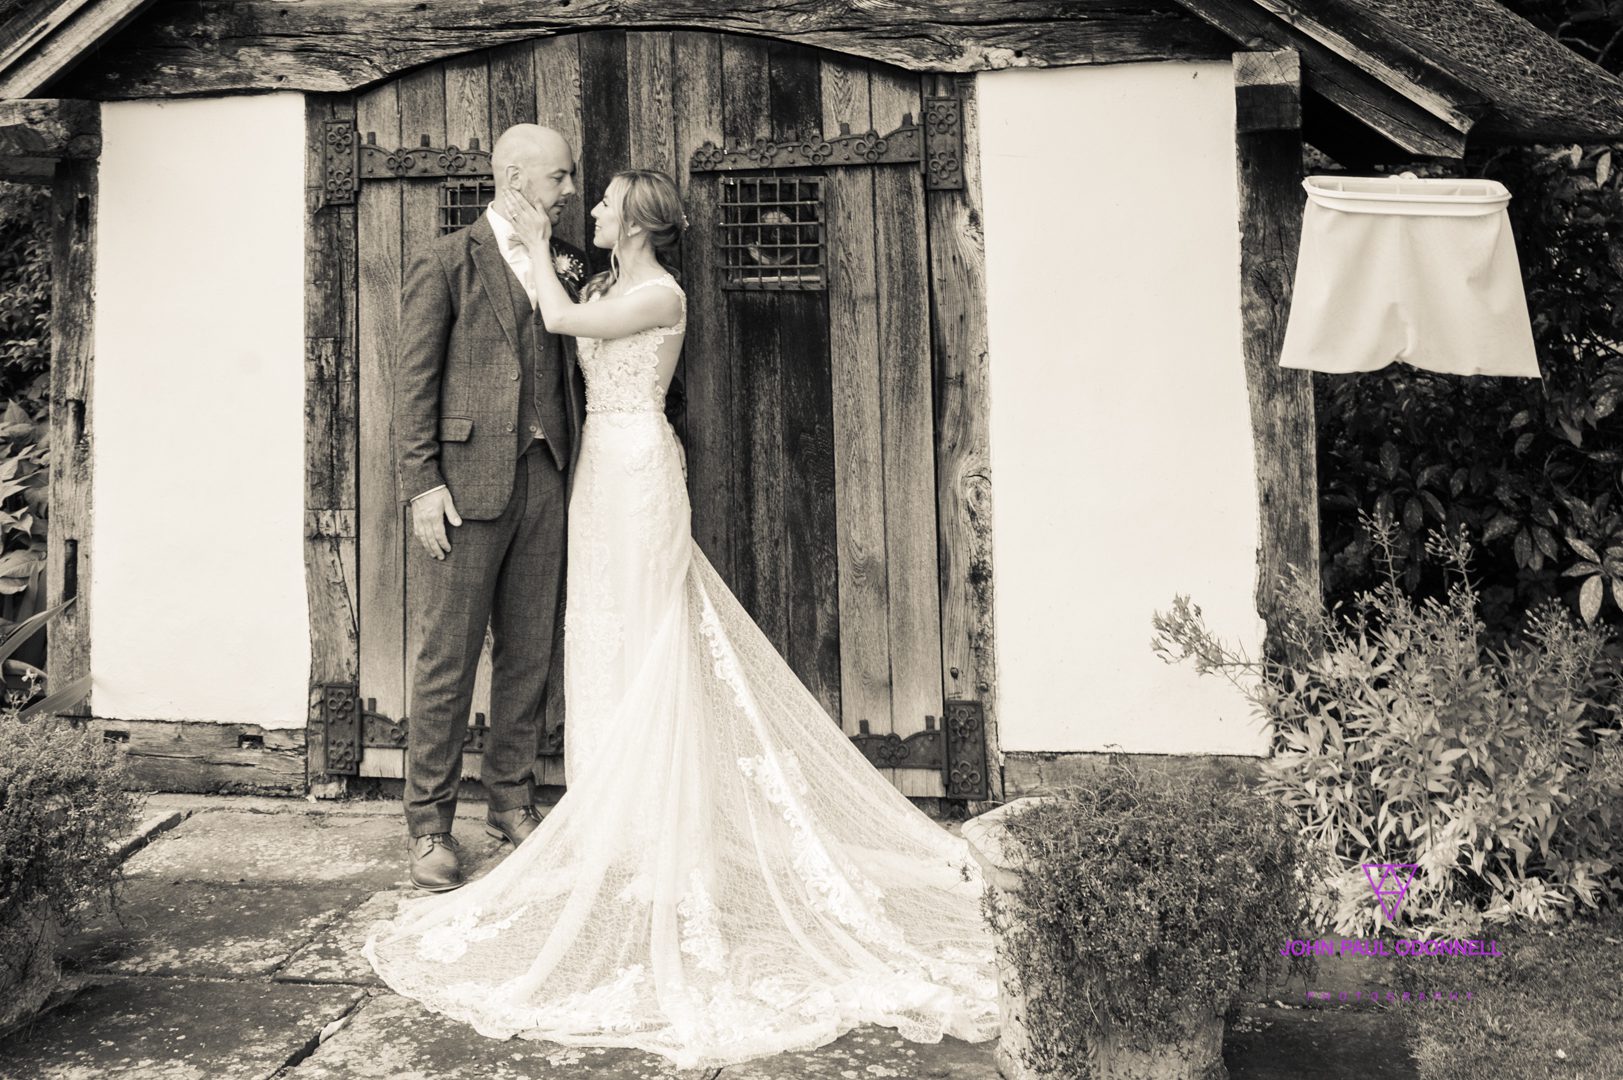 THE WEDDING OF CARLY AND CHRIS AT THE BARN AT ALSWICK